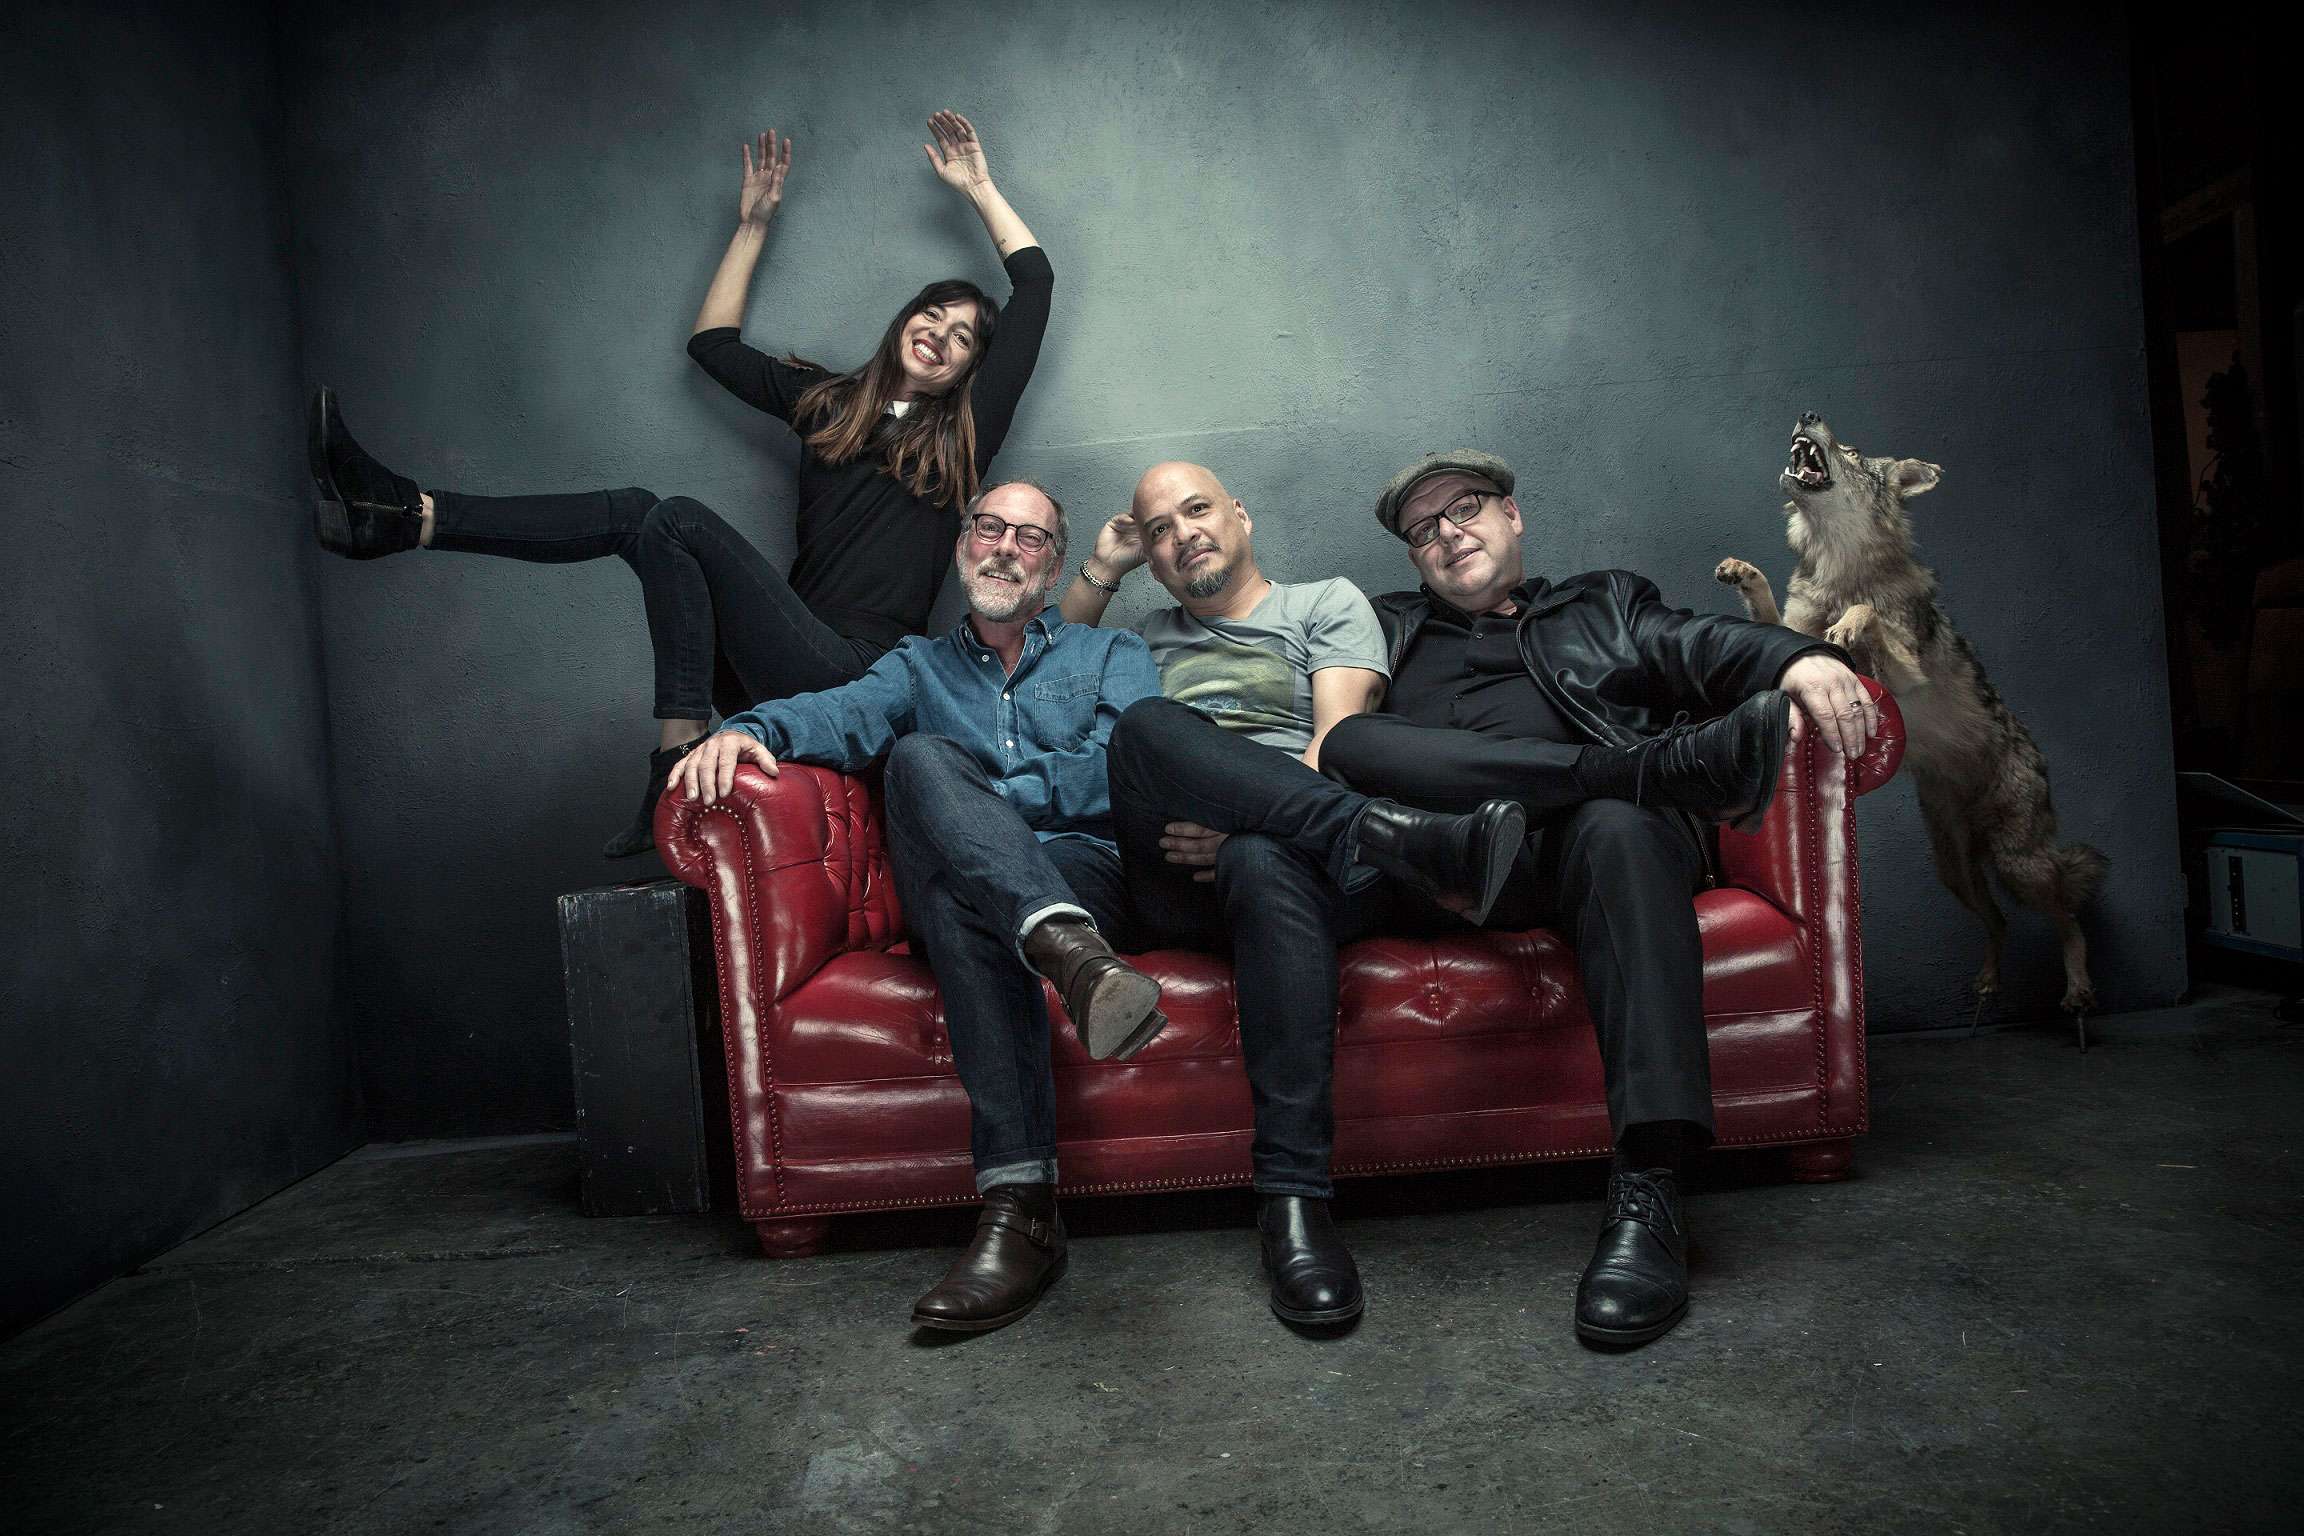 The new Pixies line-up consists of (from left) Paz Lenchantin, David Lovering, Joey Santiago and Black Francis.